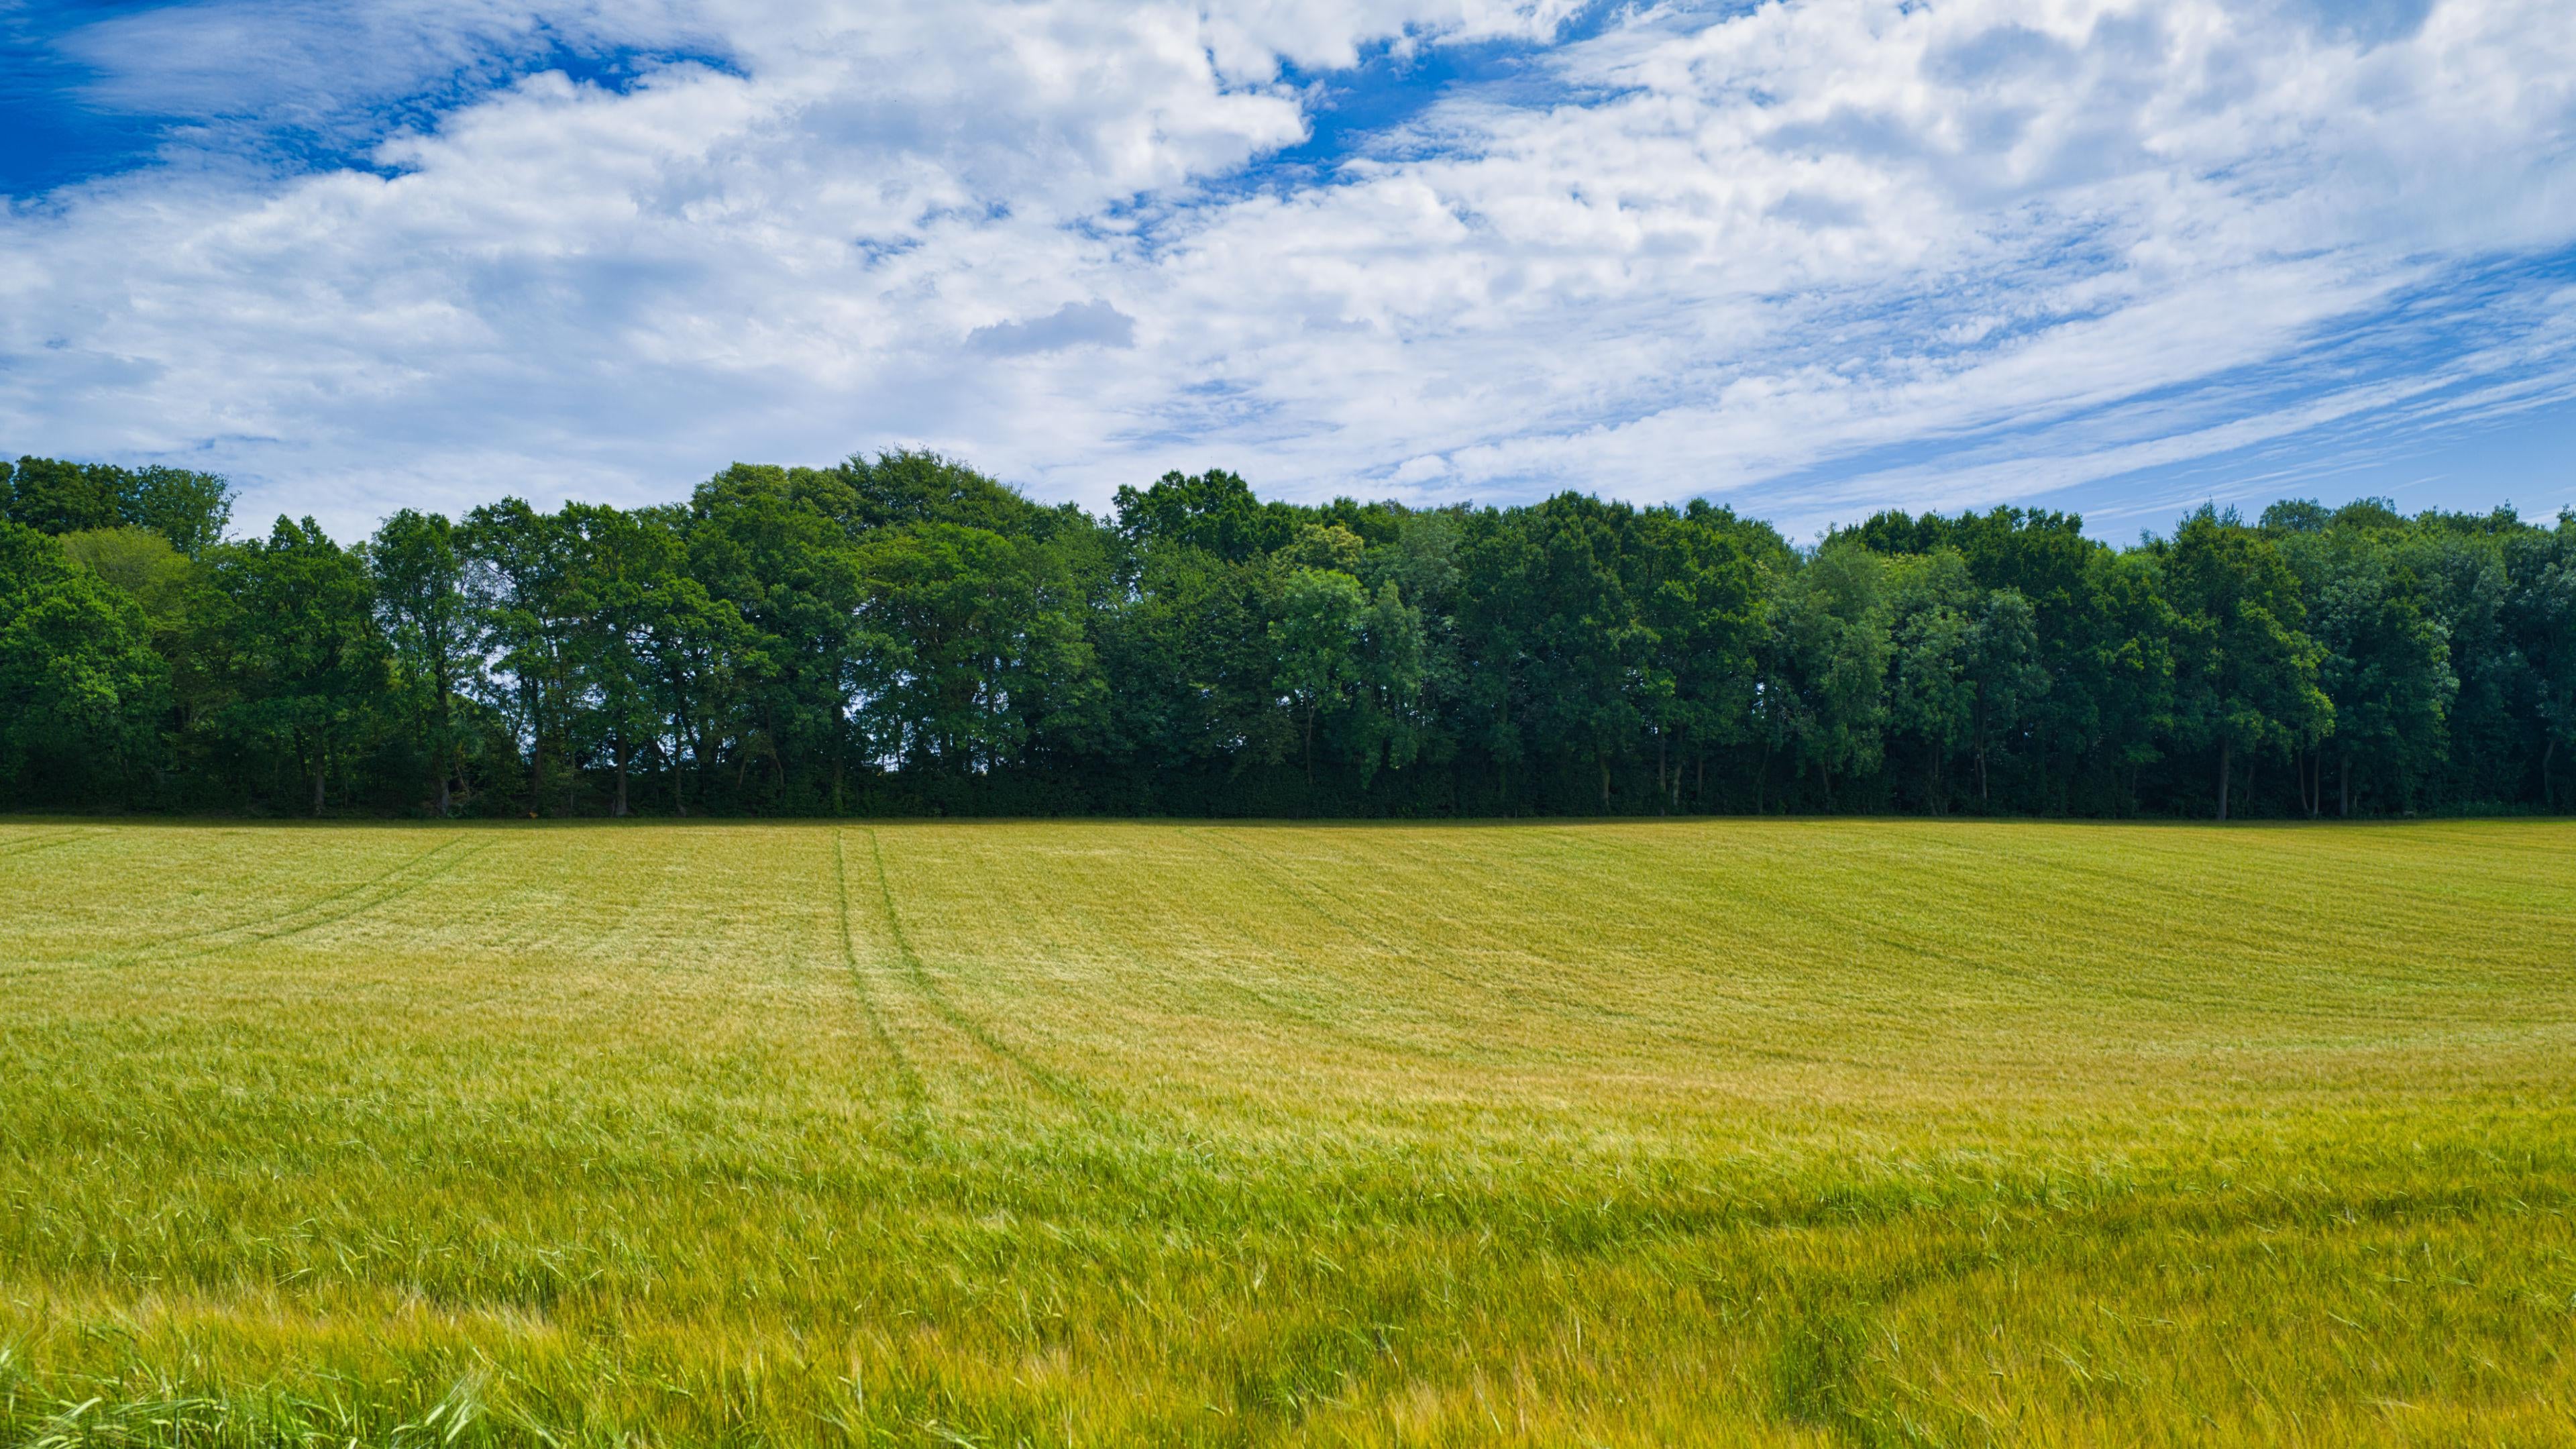 1K English Countryside Pictures  Download Free Images on Unsplash